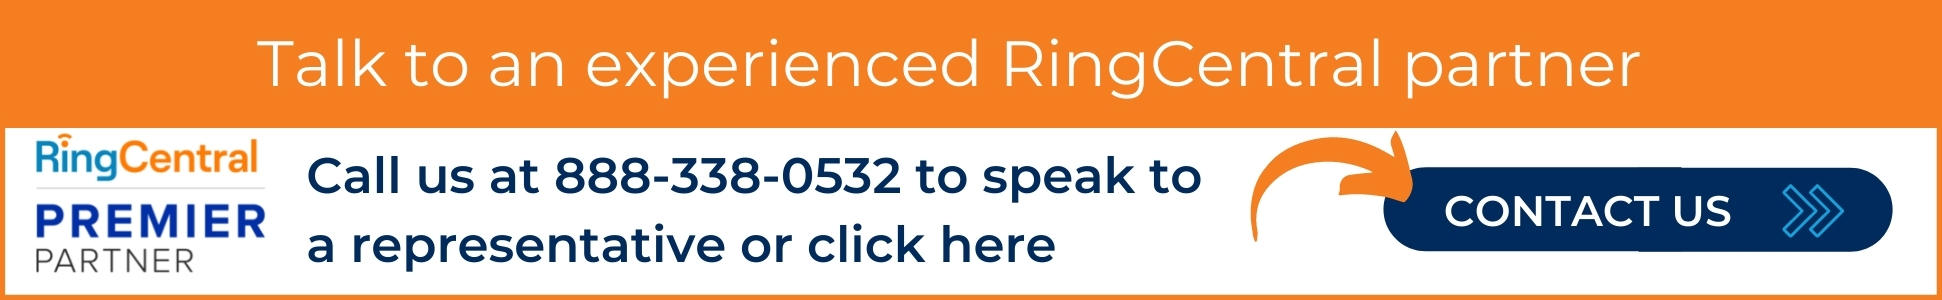 Talk to an Experienced RingCentral Partner